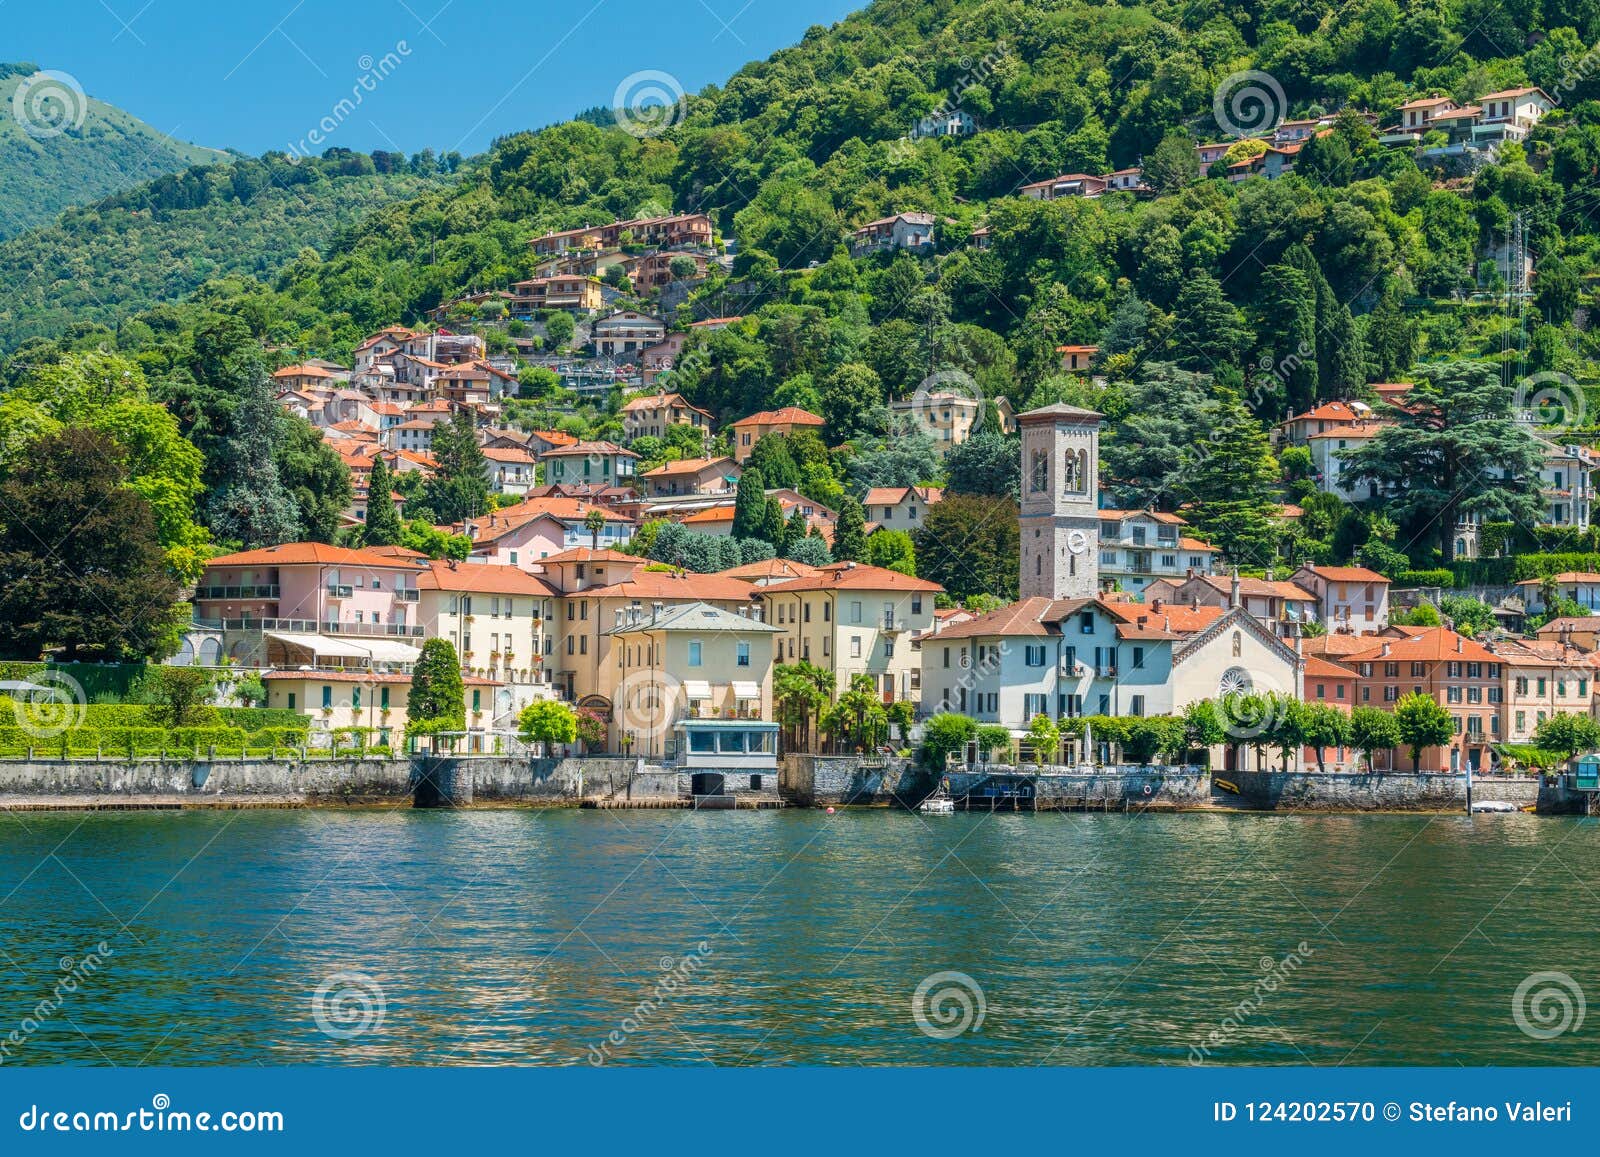 torno, colorful and picturesque village on lake como. lombardy, italy.